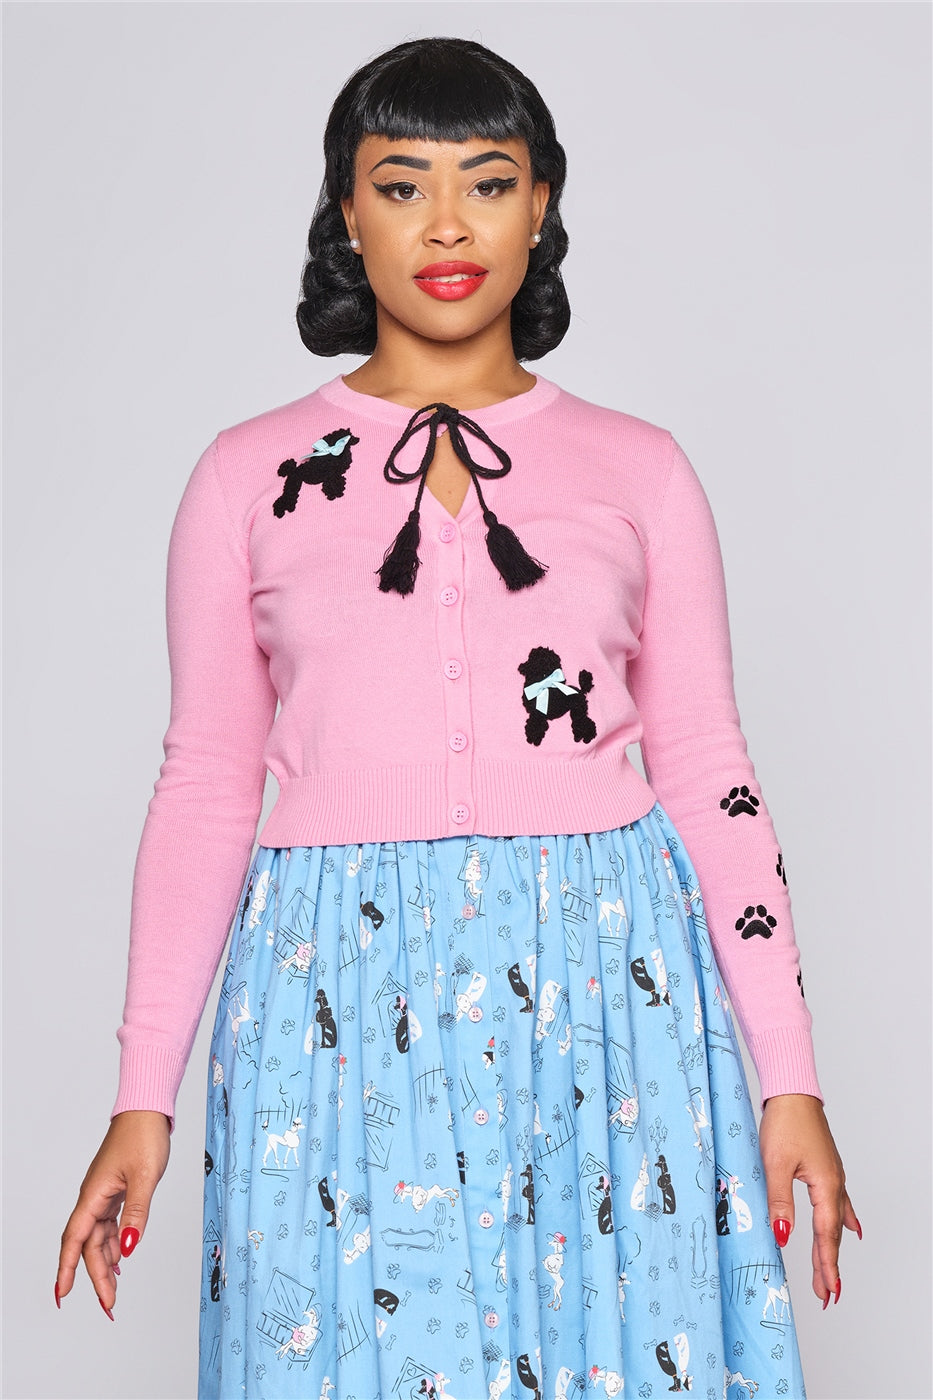 Glamorous woman with short curled black hair wearing a blue poodle print skirt and pink cardigan with Poodle motif